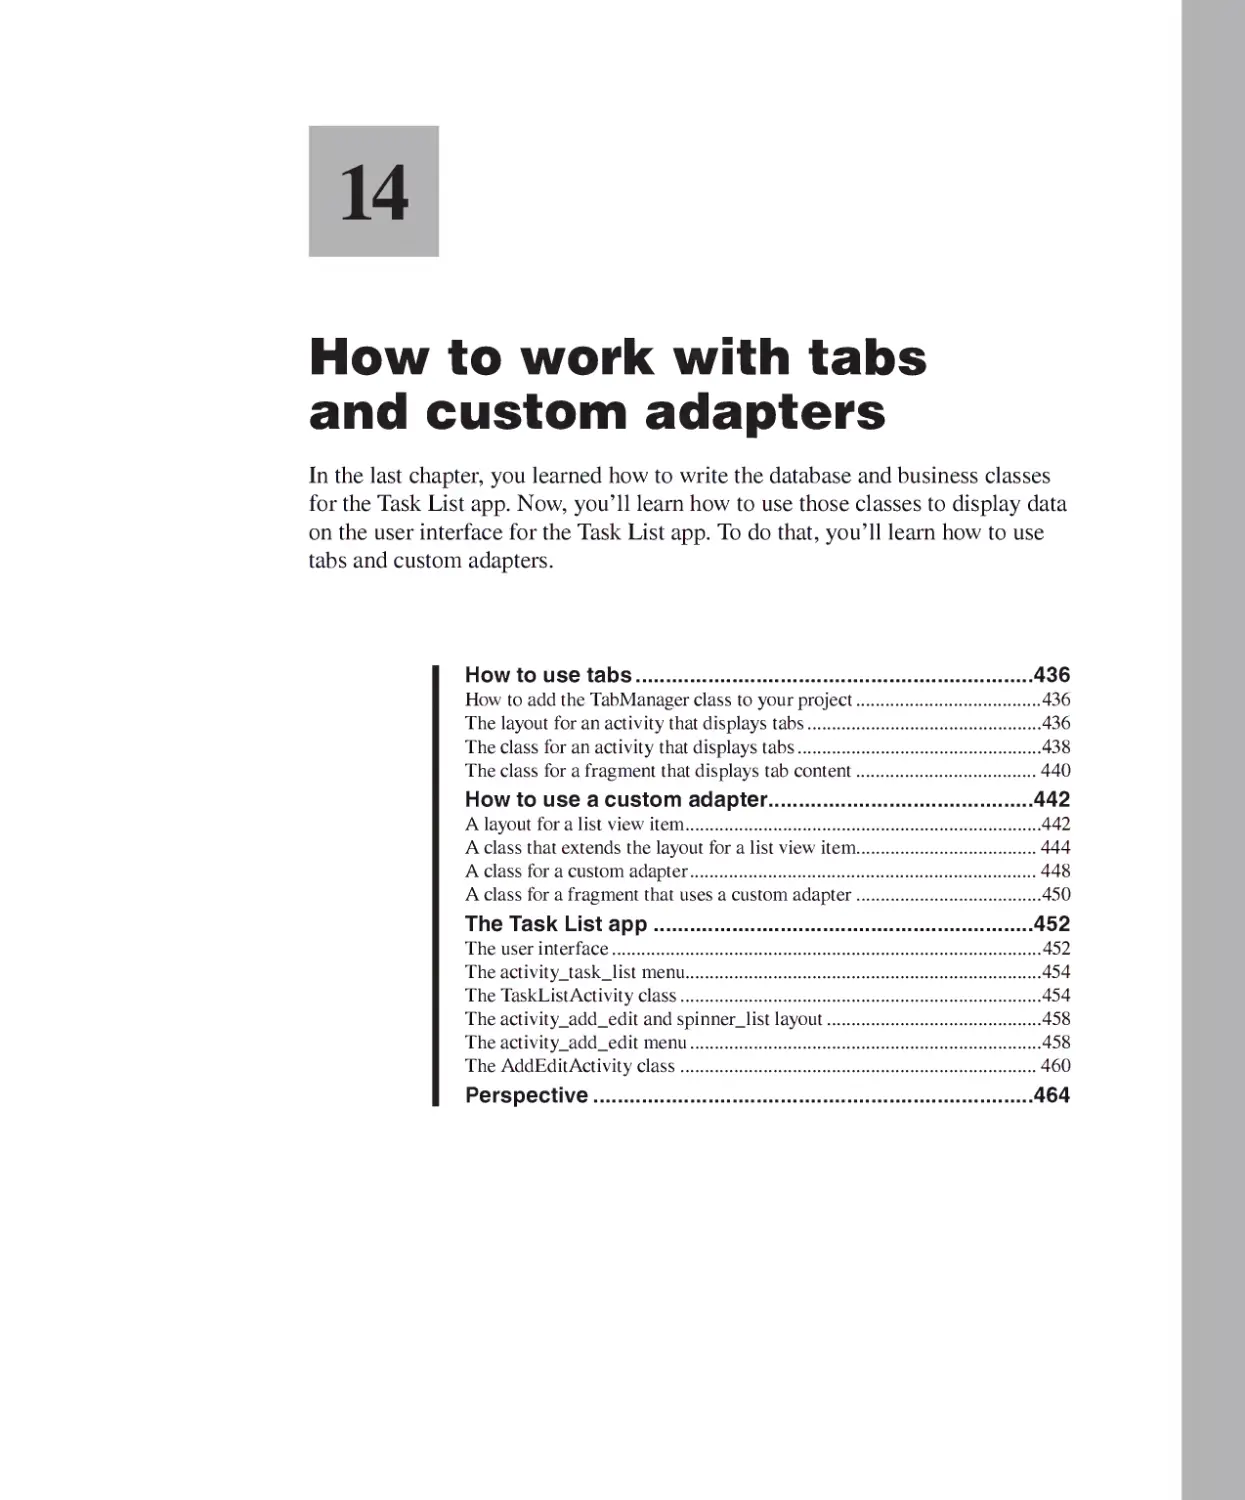 Chapter 14 - How to Work with Tabs and Custom Adapters